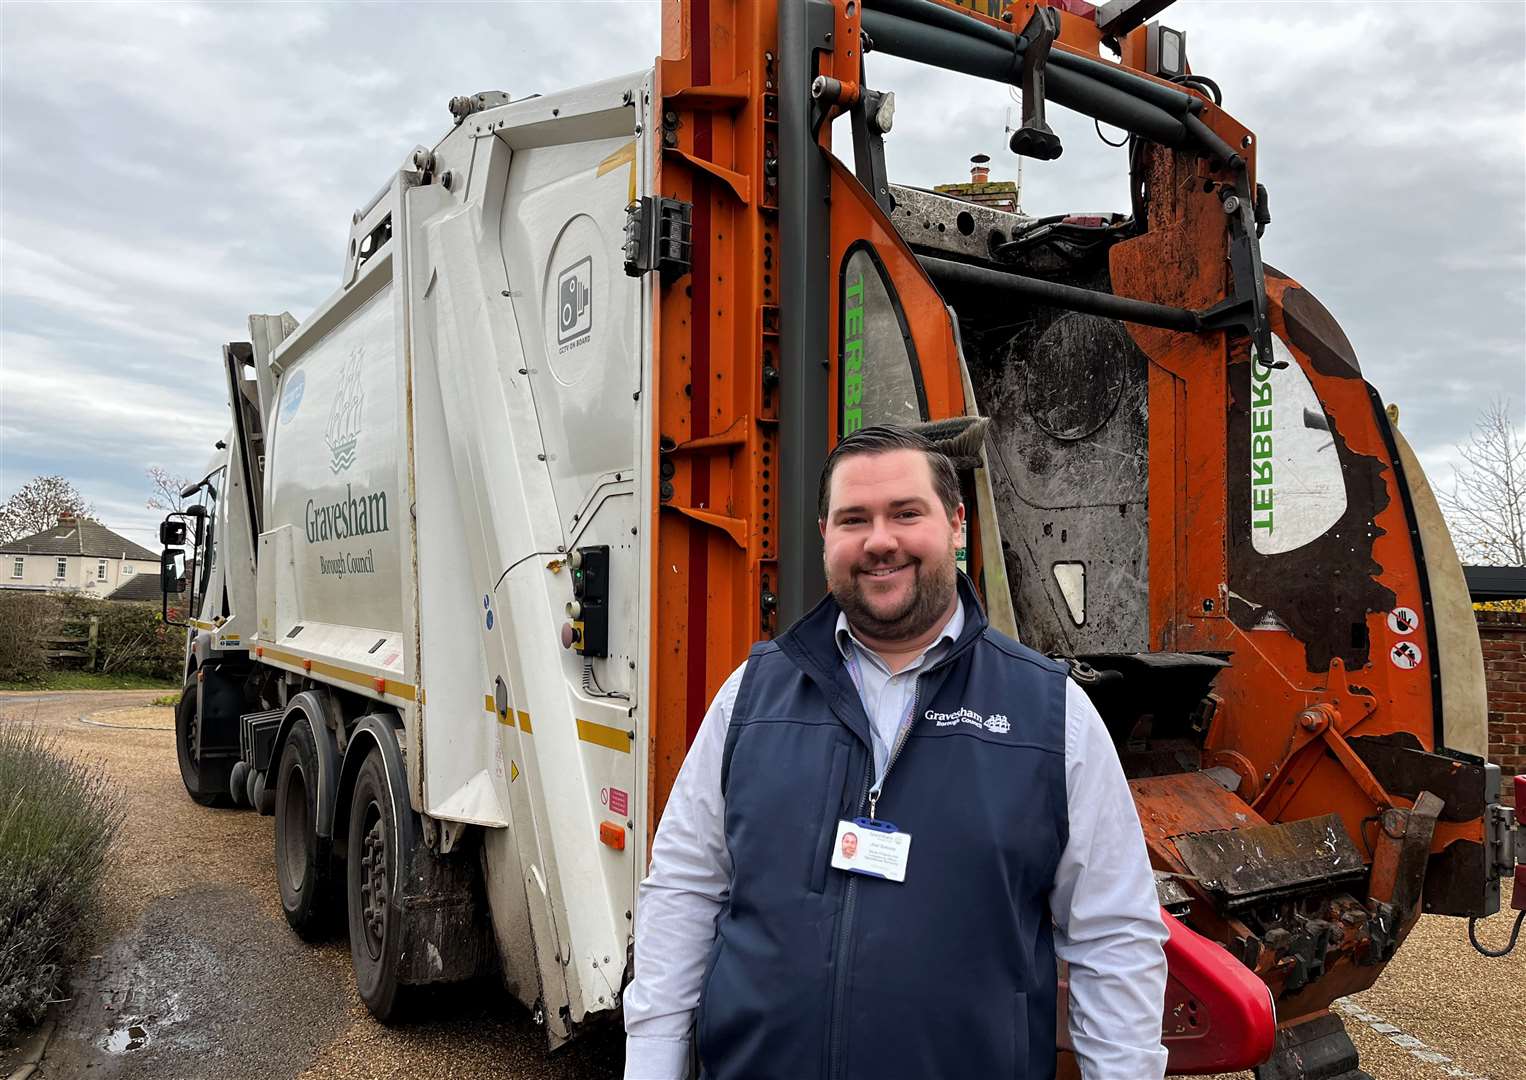 Joel Simons is waste projects and compliance officer at Gravesham Borough Council